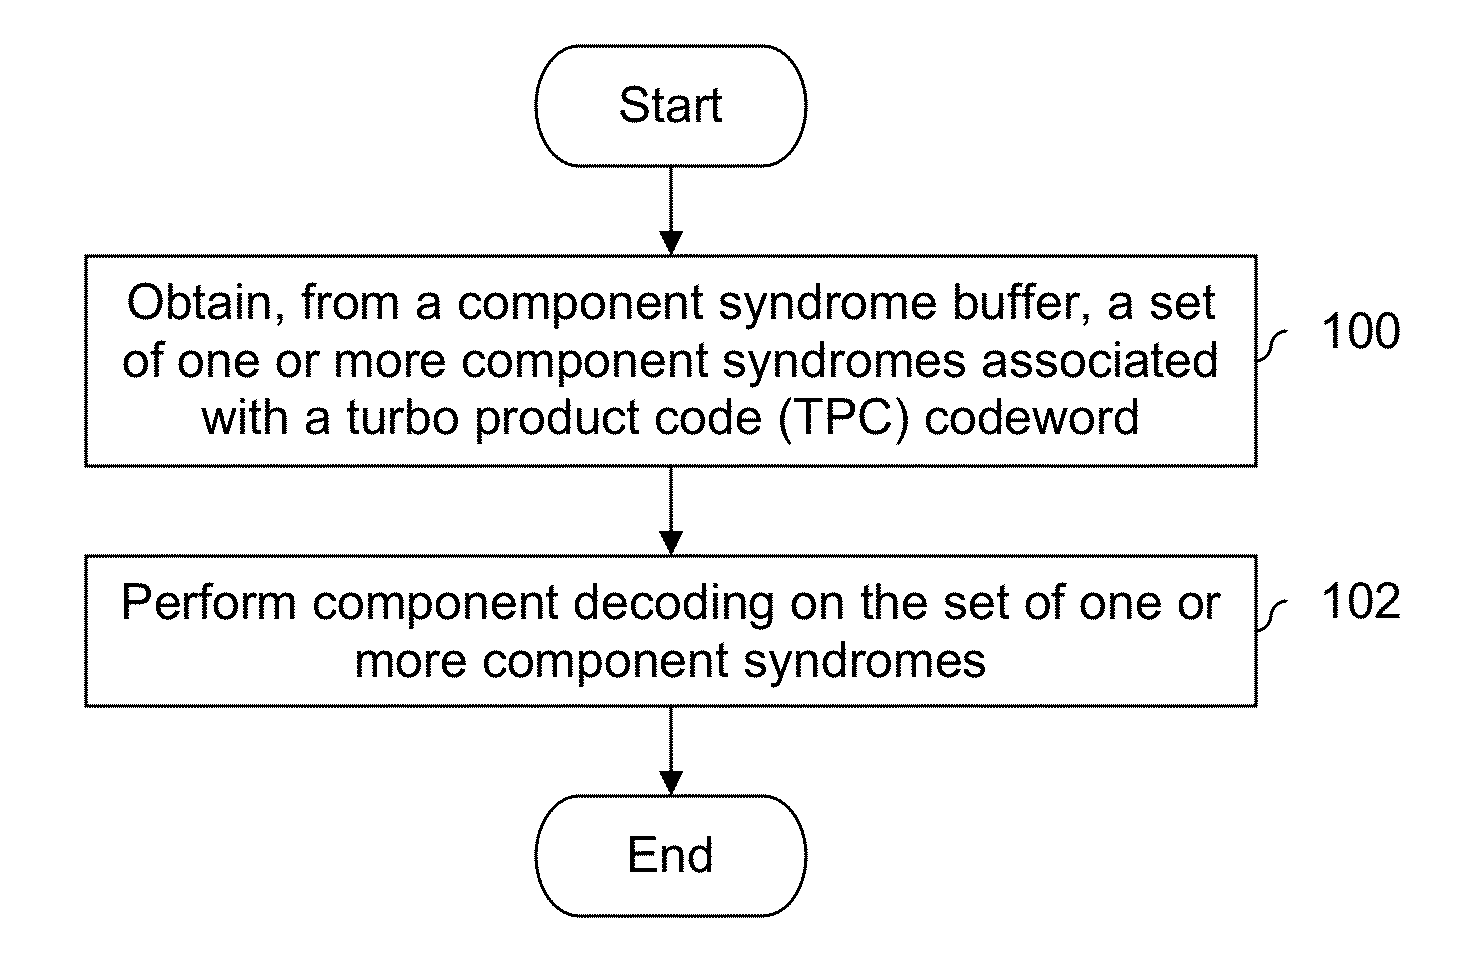 Syndrome tables for decoding turbo-product codes